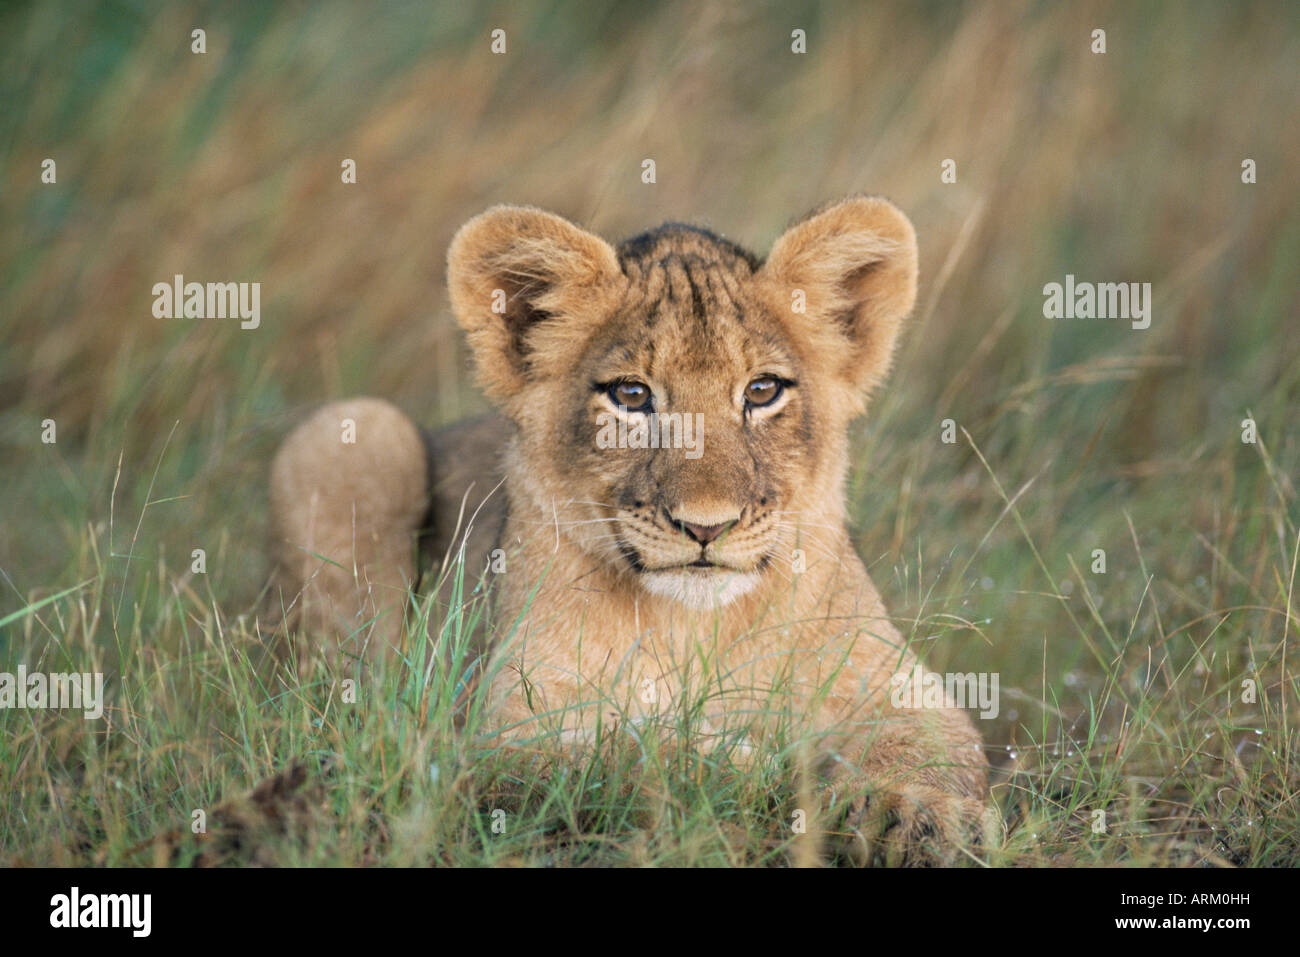 Lion cub, Panthera leo, approximately two to three months old, Kruger National Park, South Africa, Africa Stock Photo